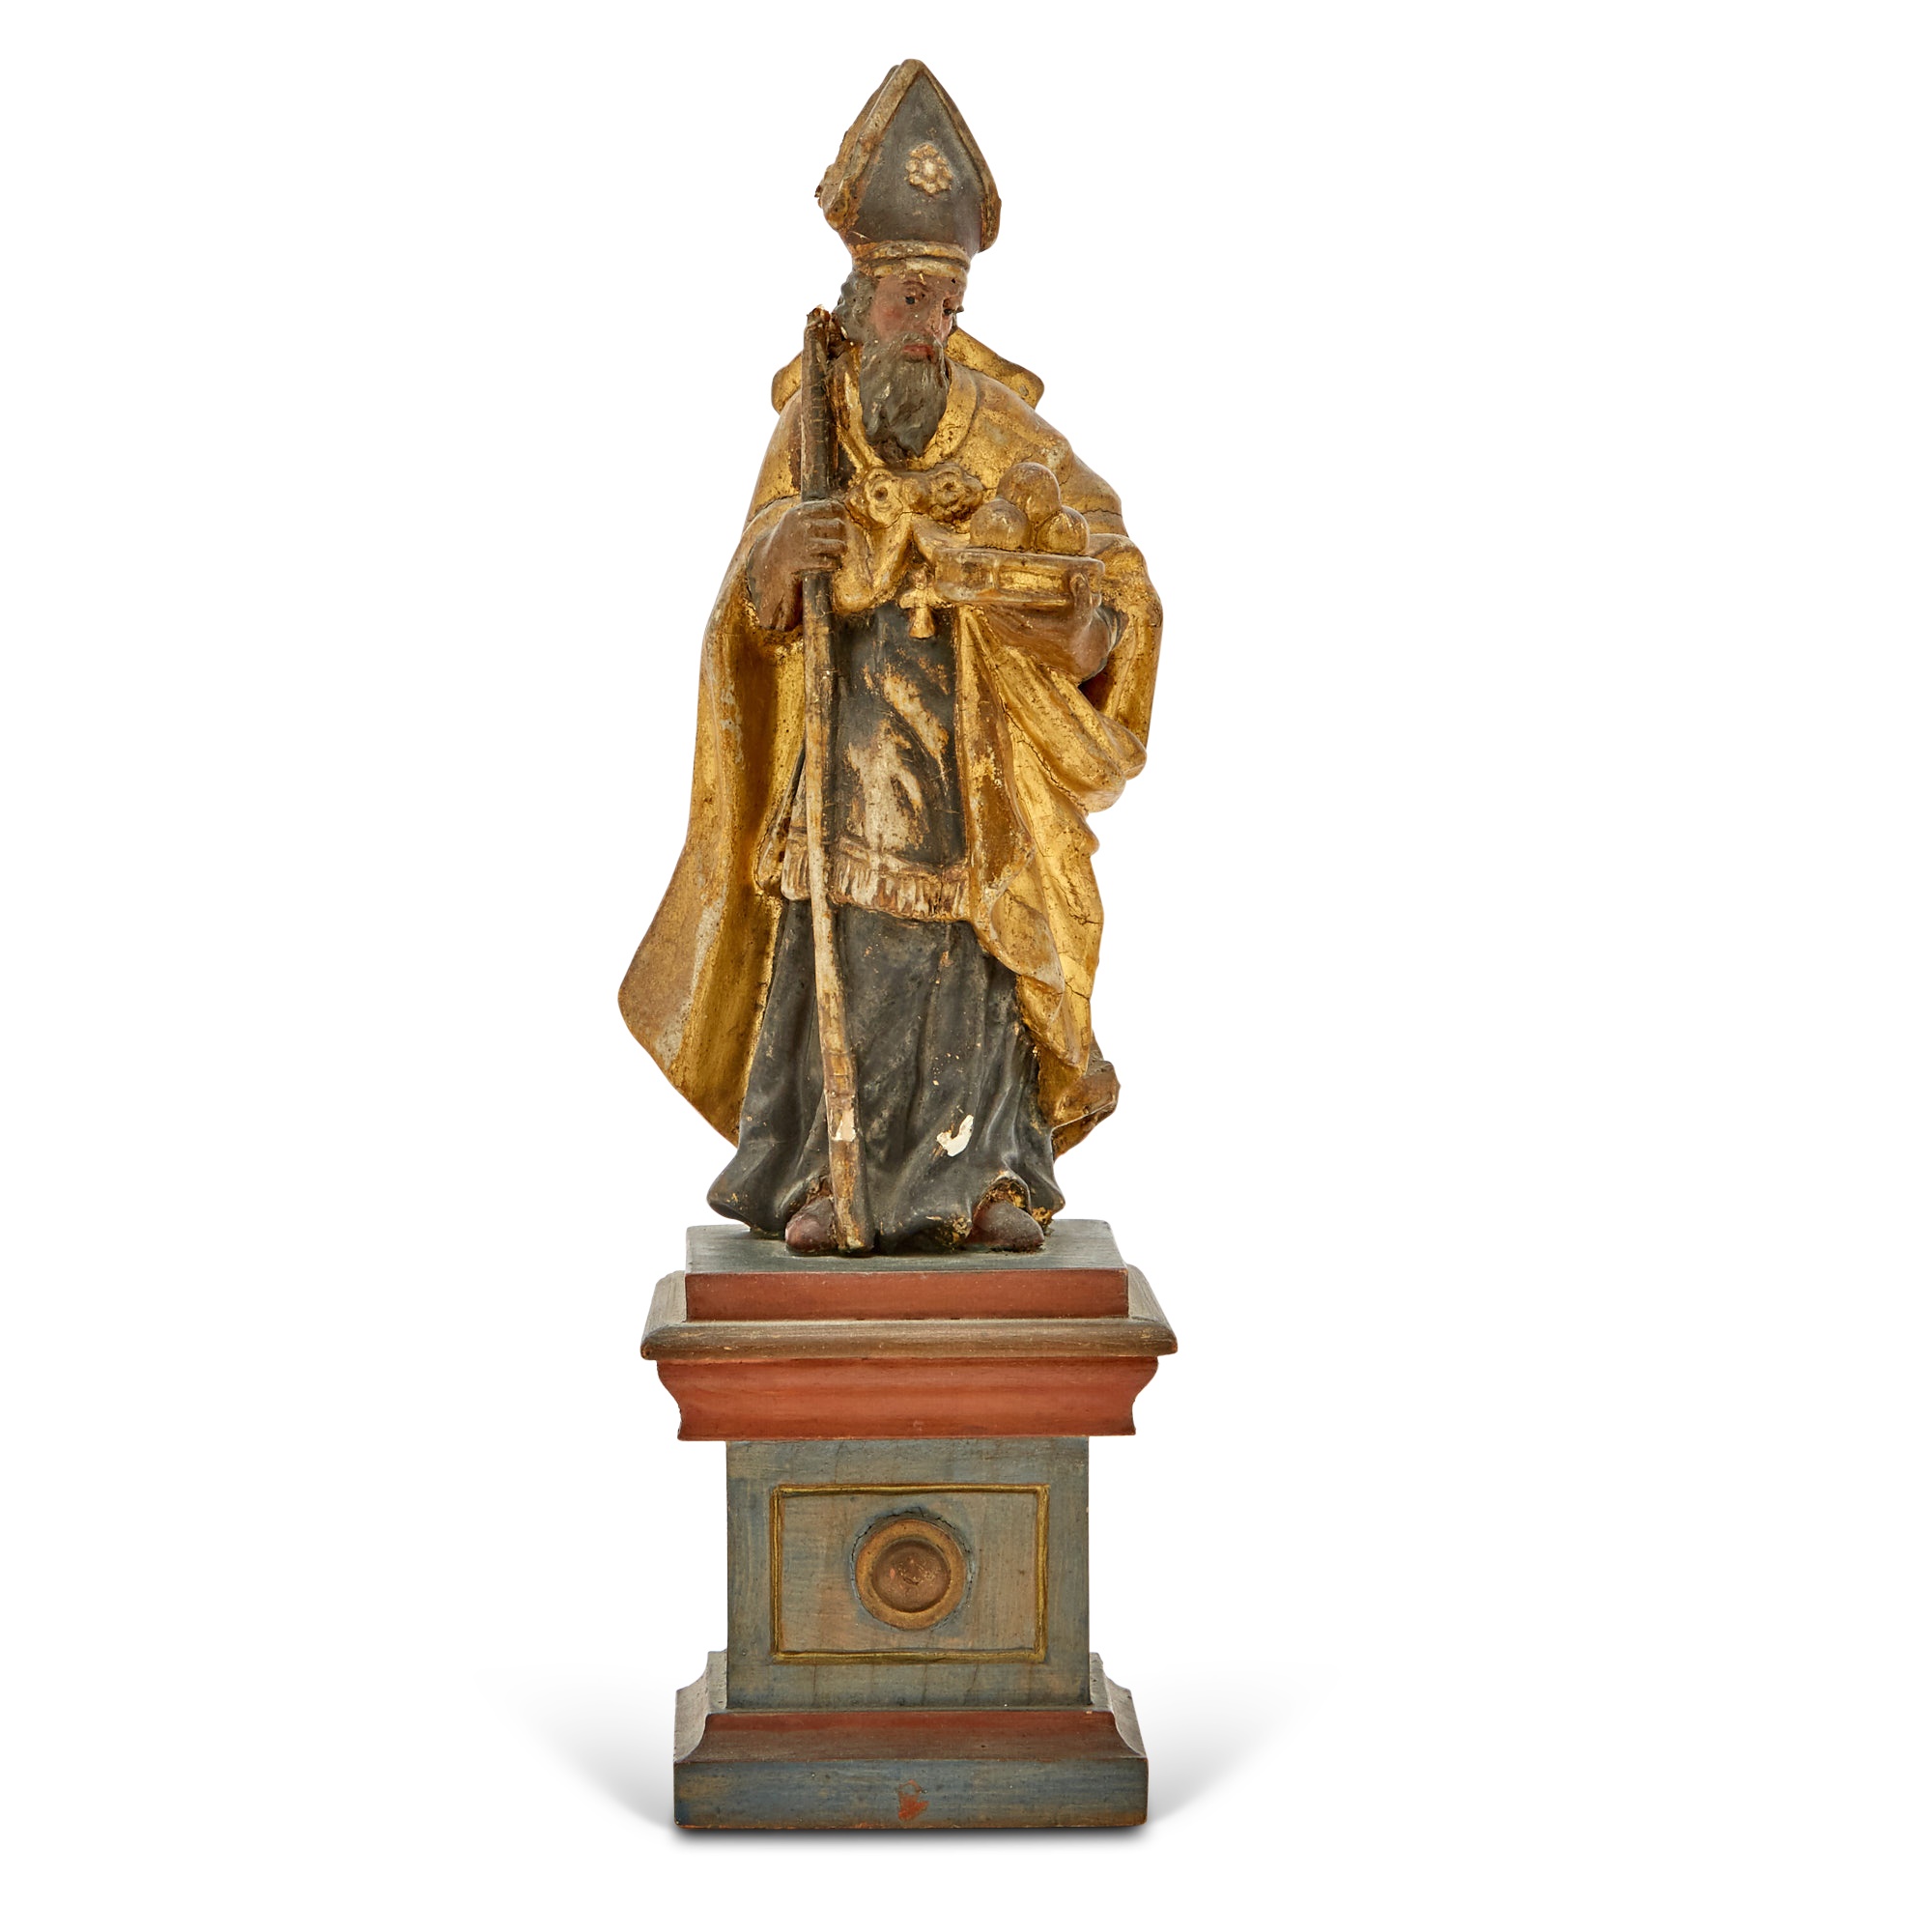 Continental Polychromed and Parcel-Gilt Carved Wood Figure of St. Nicholas